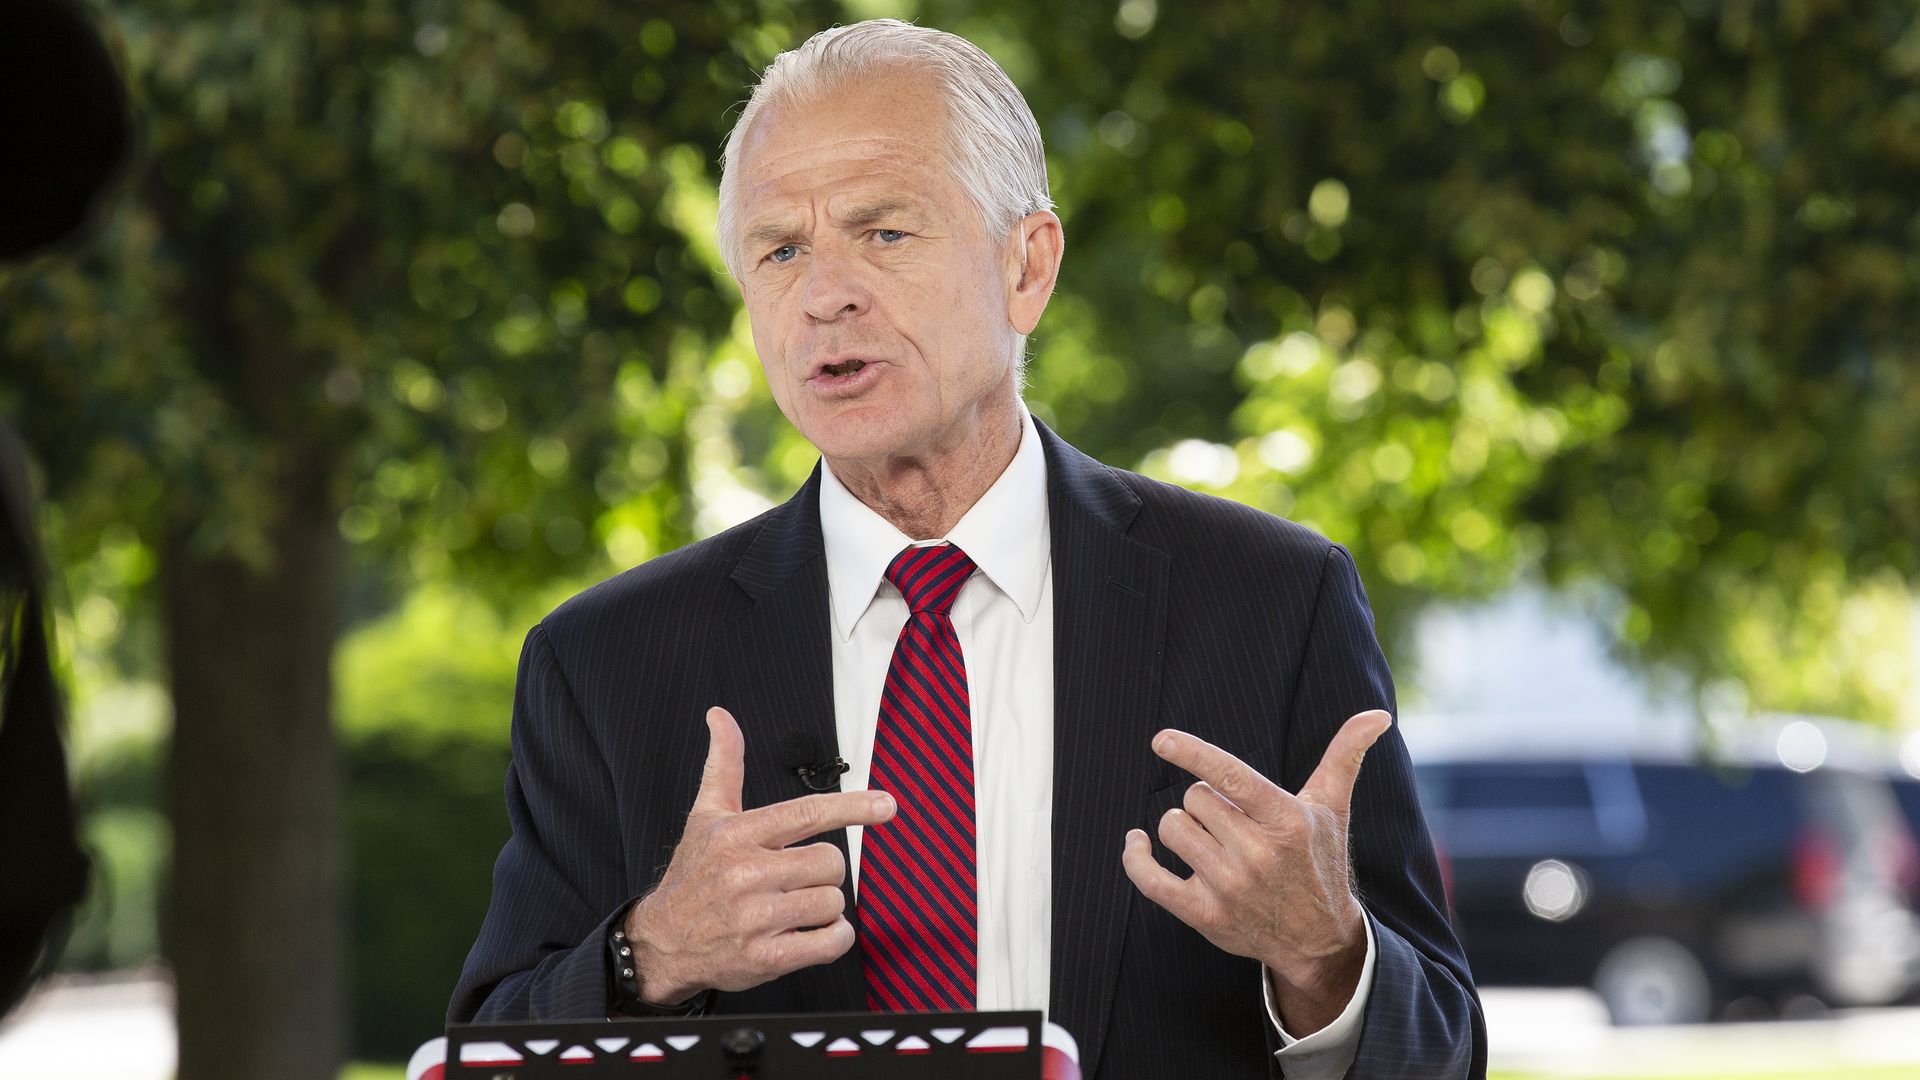 Peter Navarro, then director of the National Trade Council, speaks during a television interview outside the White House in Washington, D.C., U.S., on Monday, June 8, 2020. 